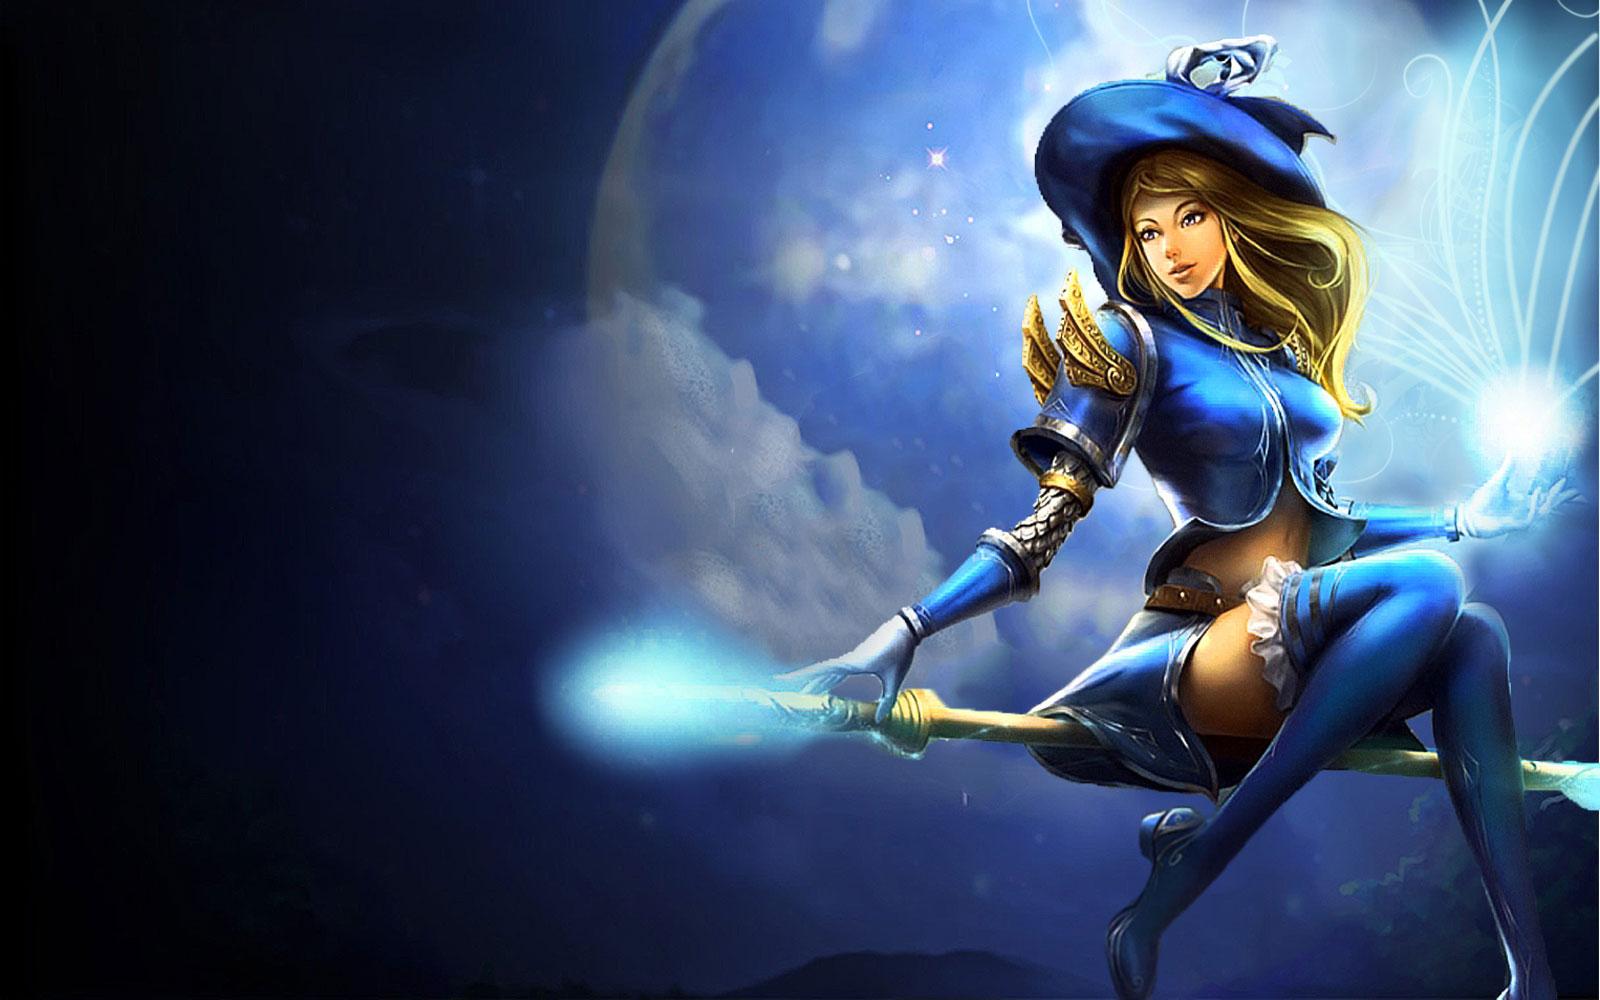 1600 x 1000 · jpeg - League Of Legends Animated Movie HD Wallpapers - All HD Wallpapers